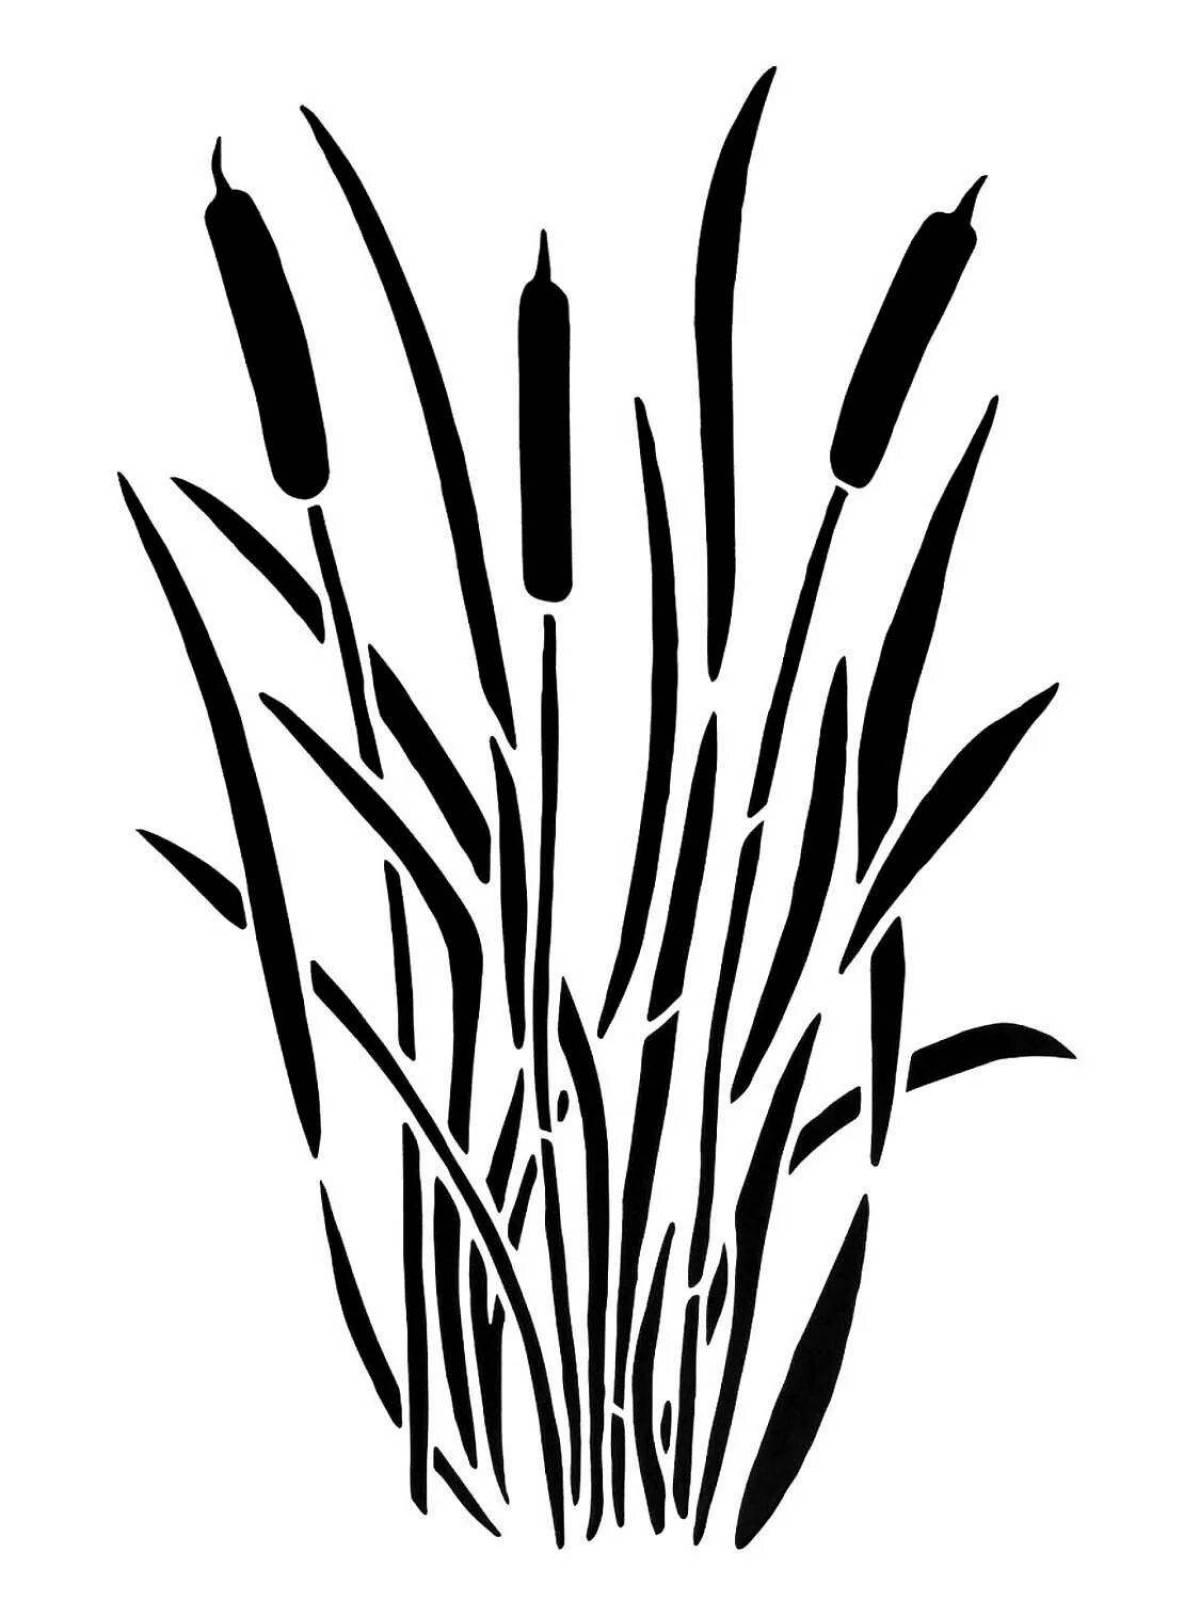 Glitter Reeds Coloring Page for Toddlers